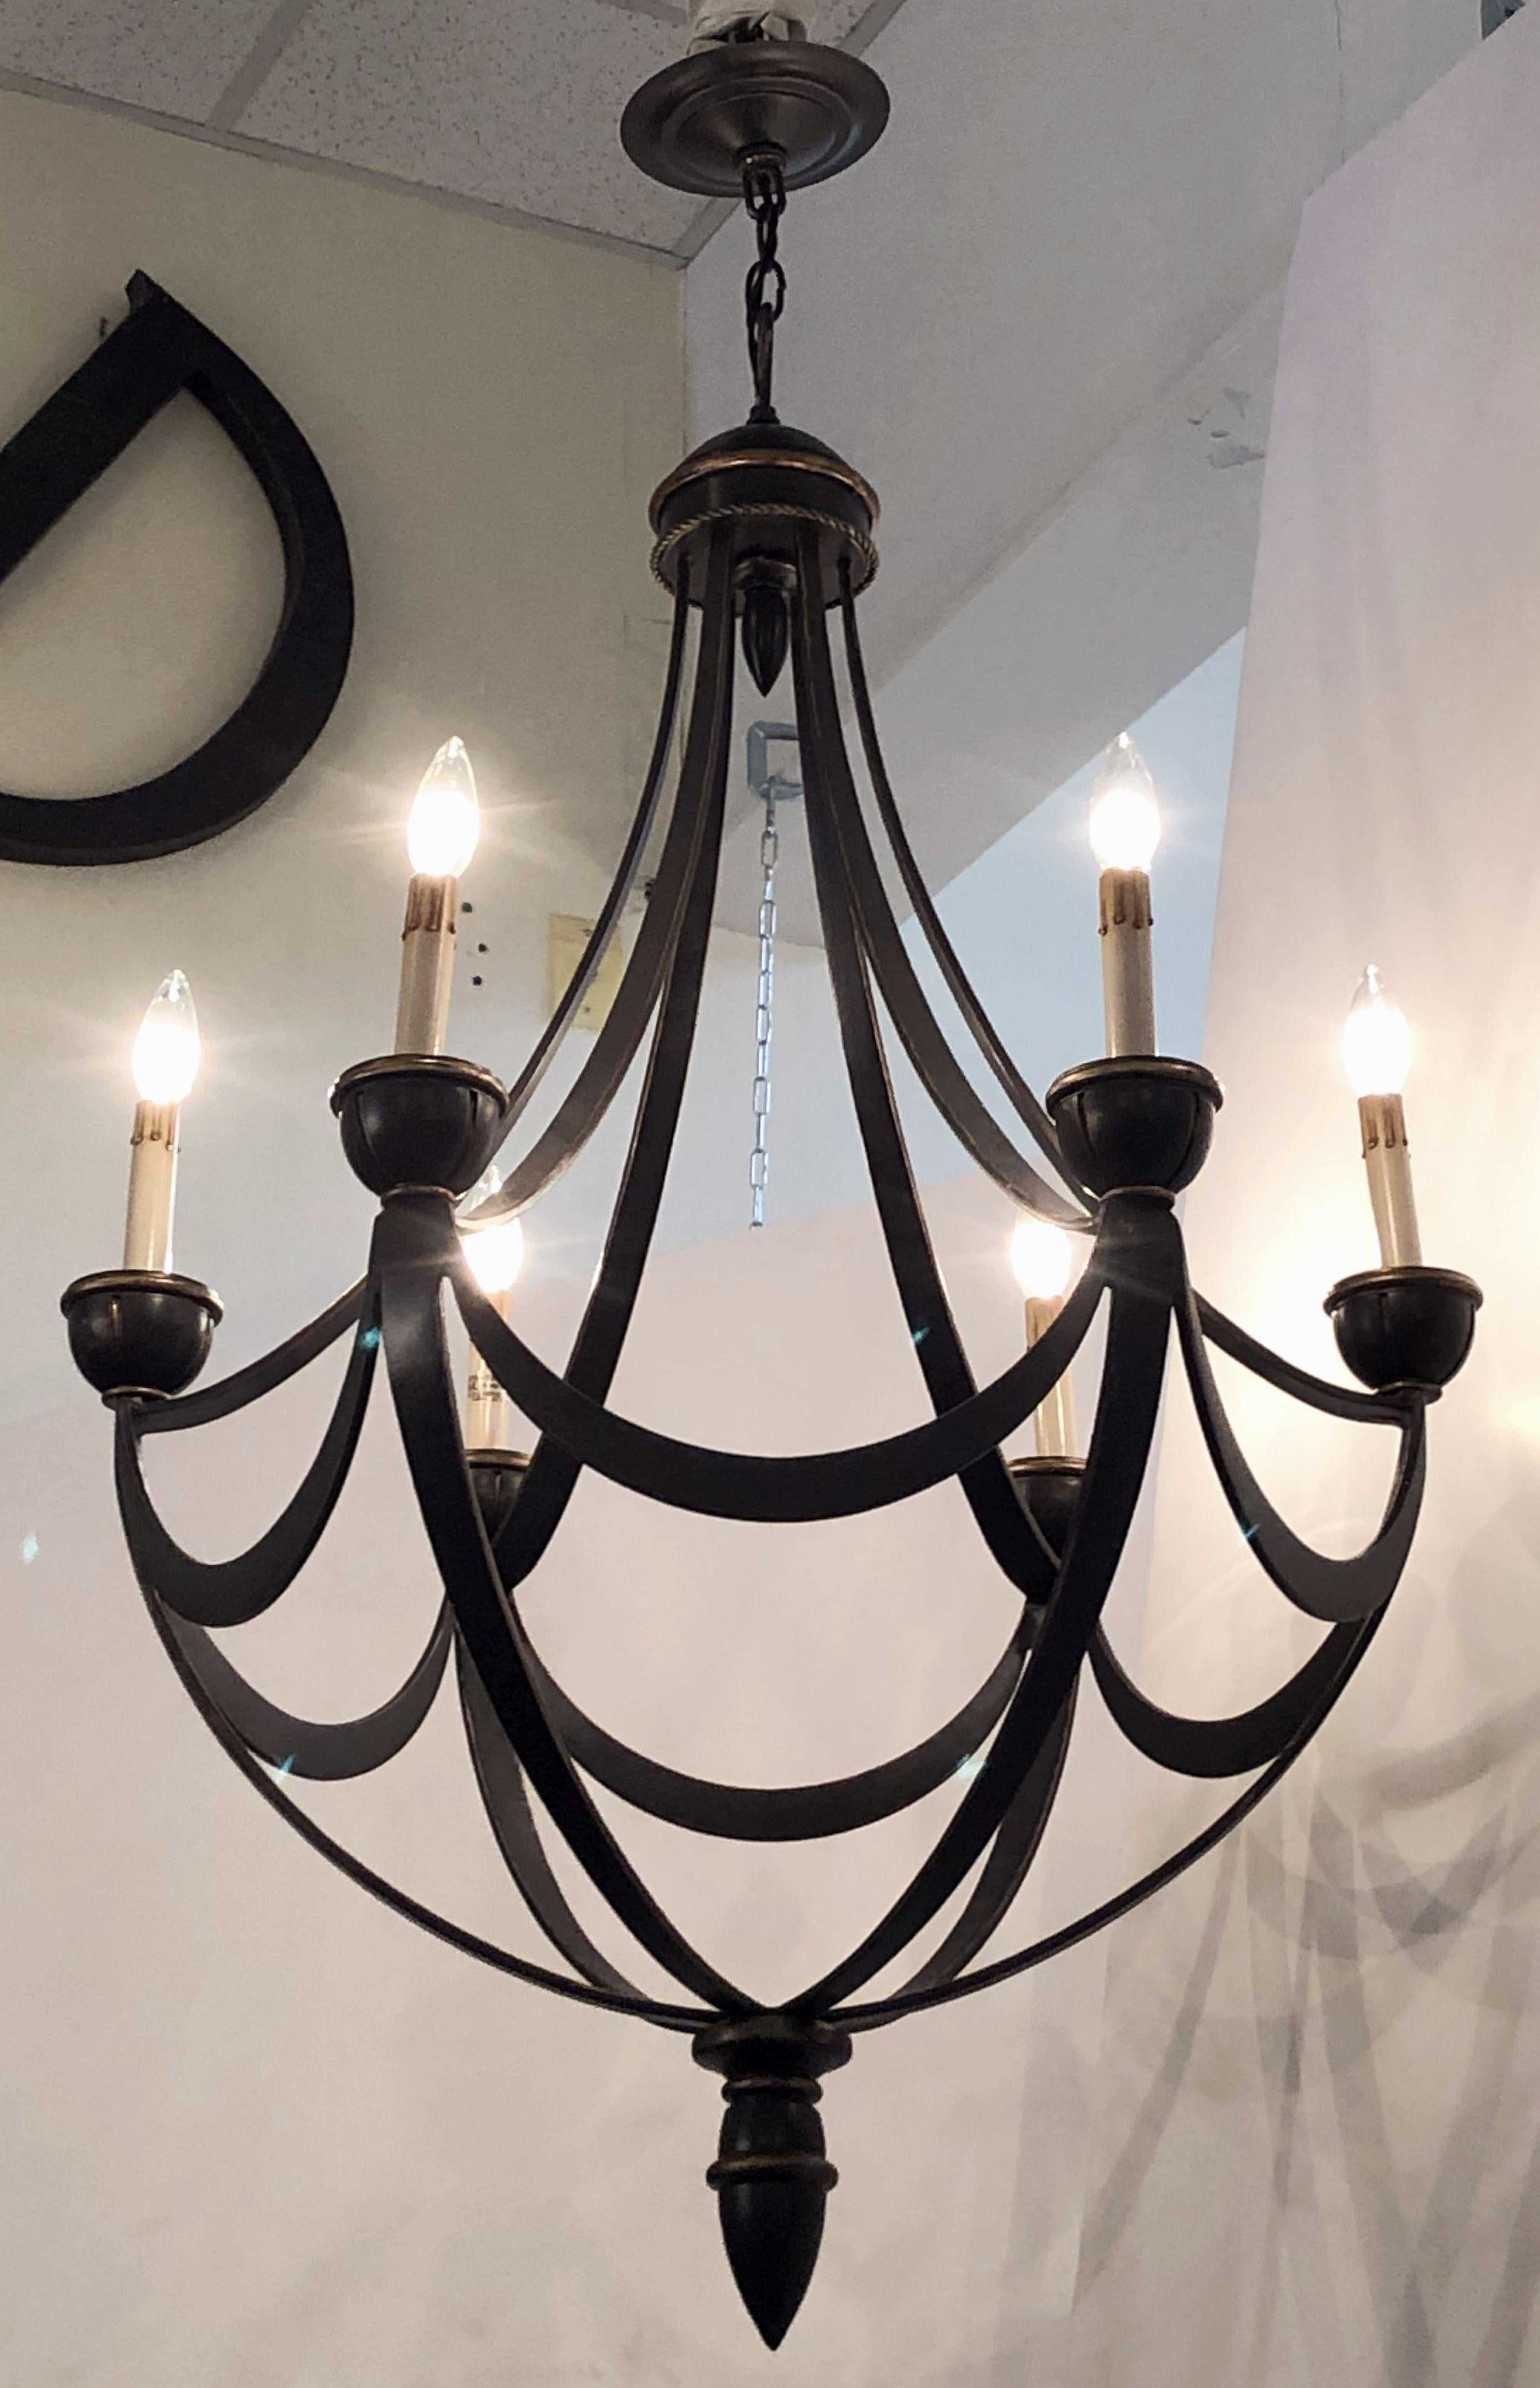 Metal American Six-Light Chandelier or Hanging Fixture, Modern Empire Style (Dia 29